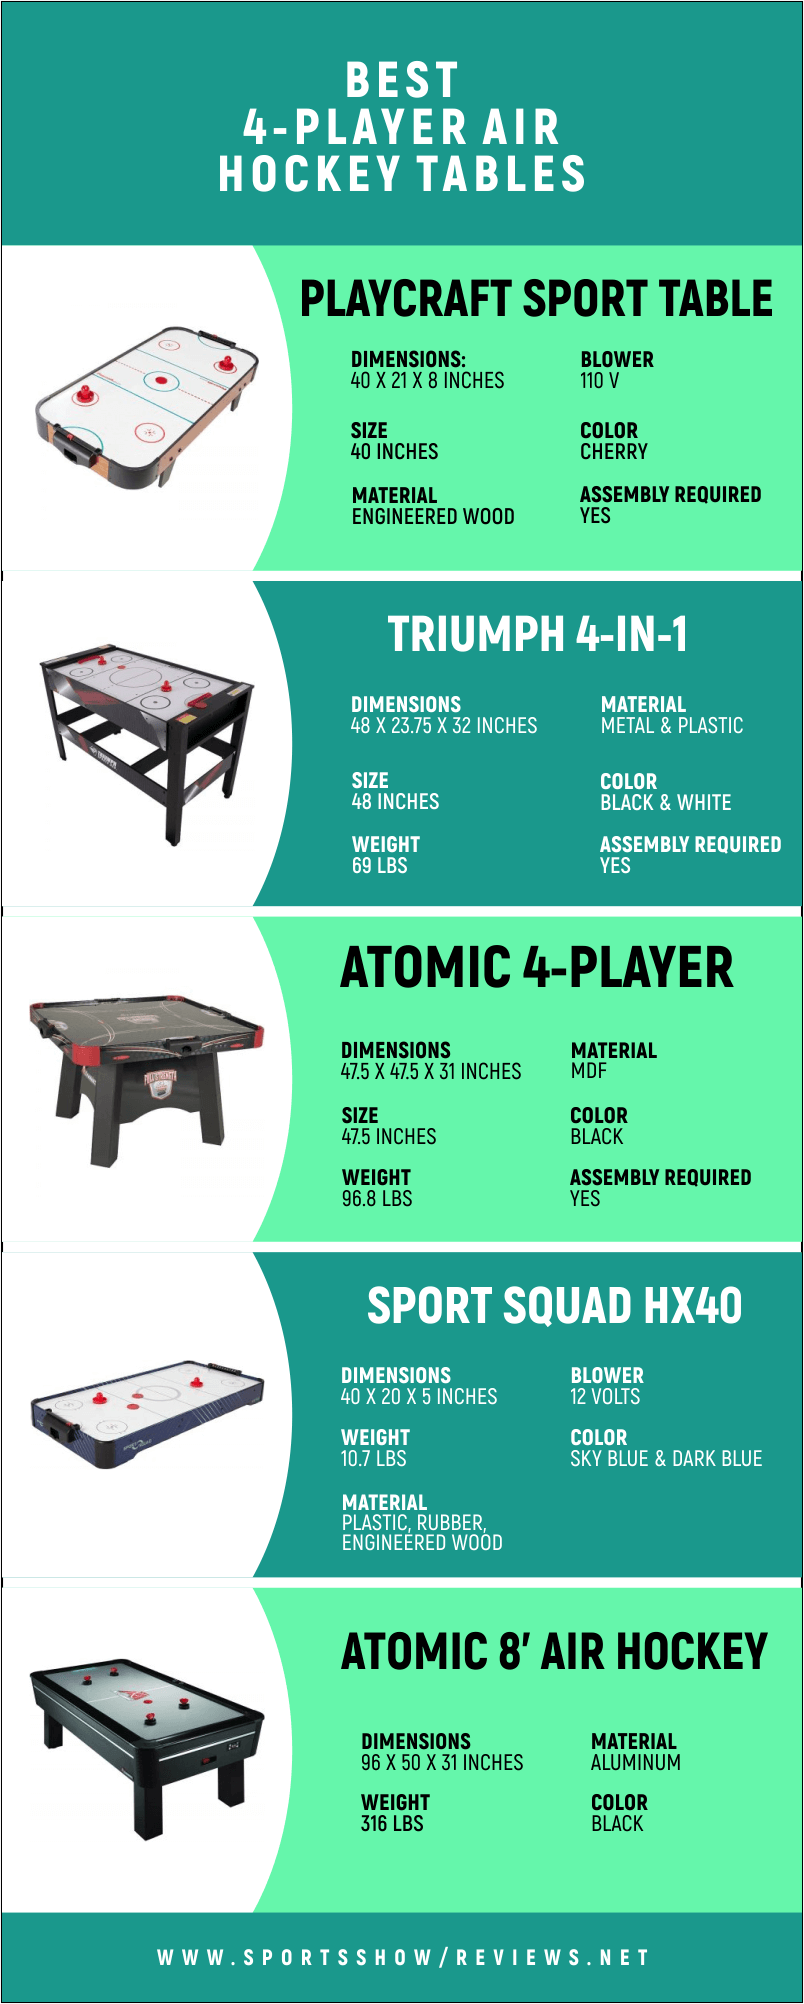 Best 4-Player Air Hockey Tables - Infographic